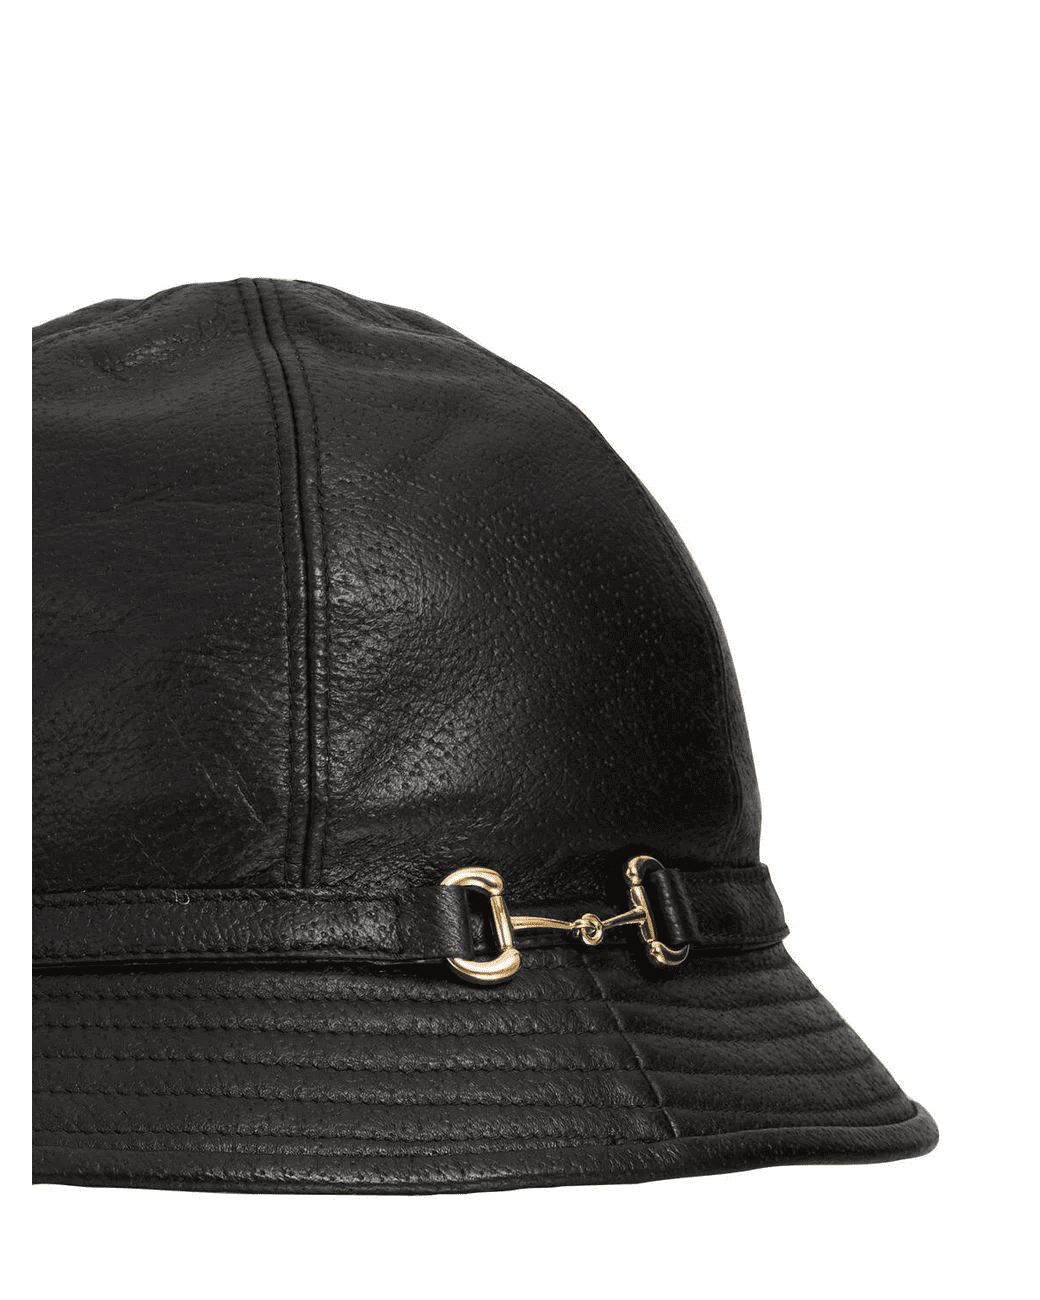 Leather Cloche Hat